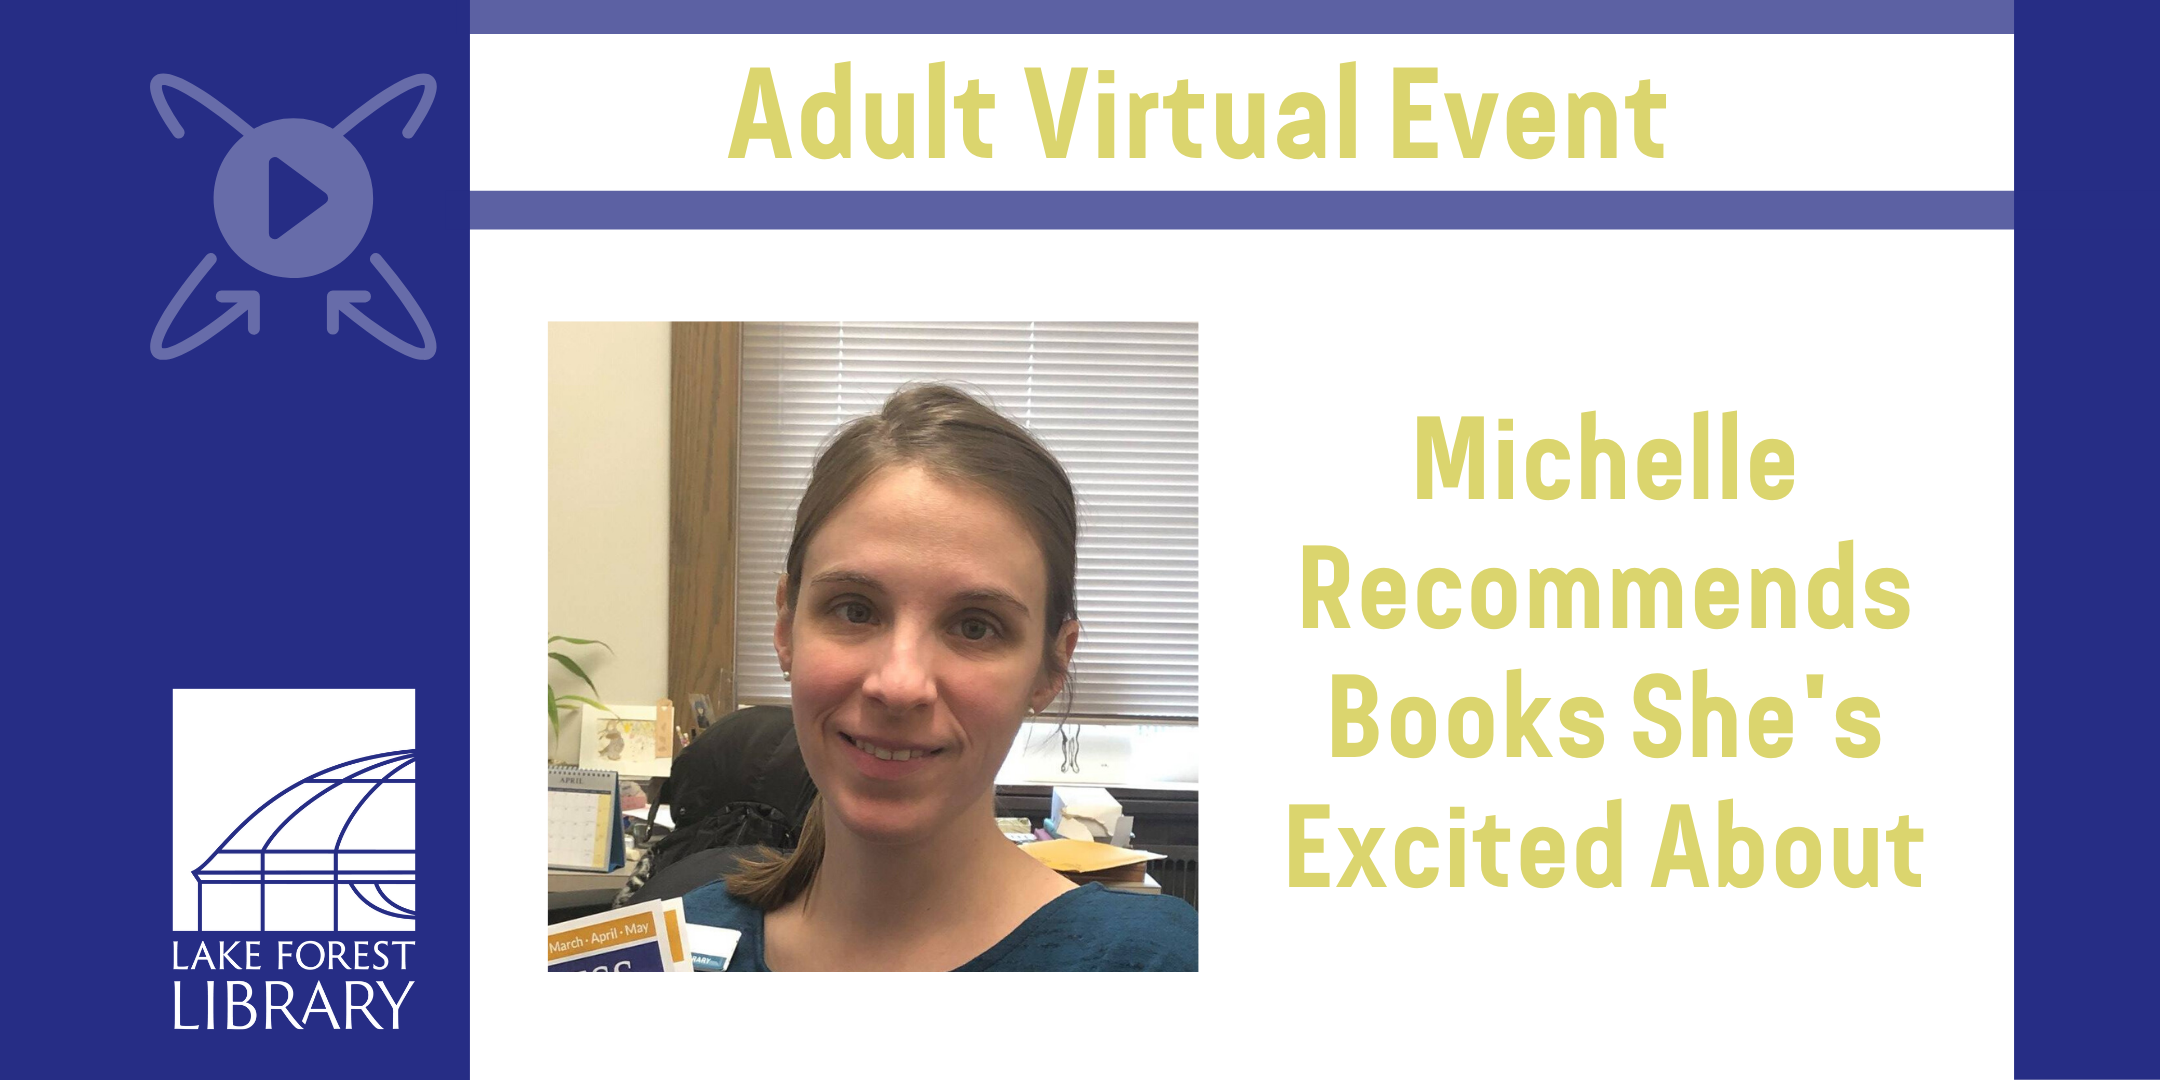 Michelle Recommends Books She's Excited About